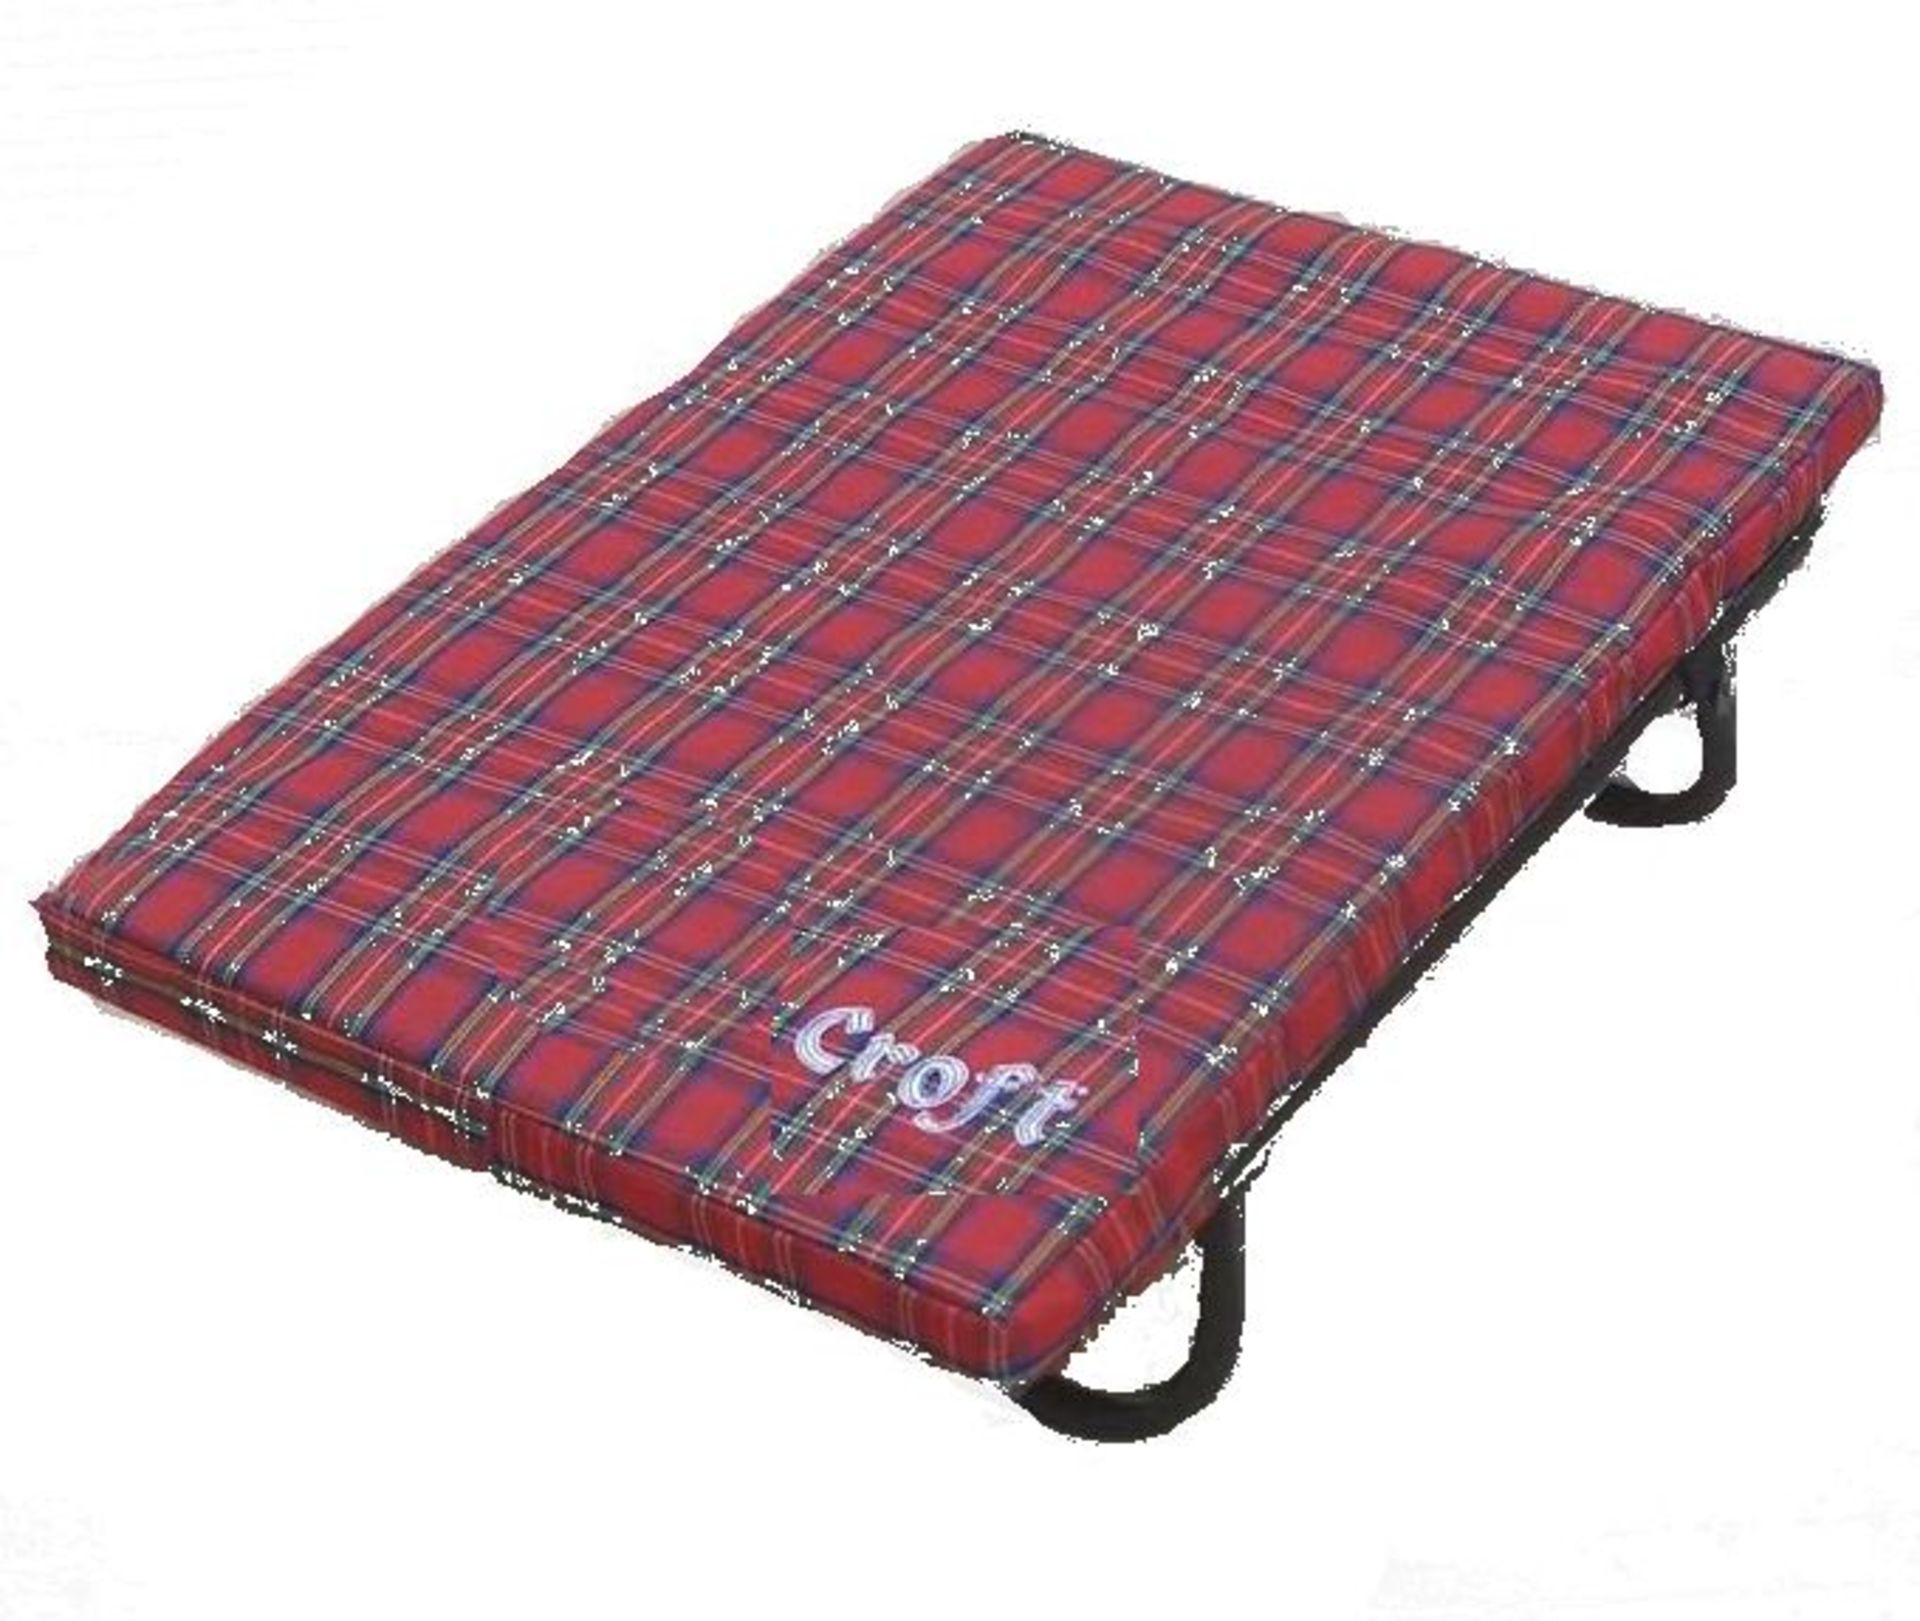 30 x Foldaway Camper Bed for Dogs 24" x 18". Total RRP £1,050